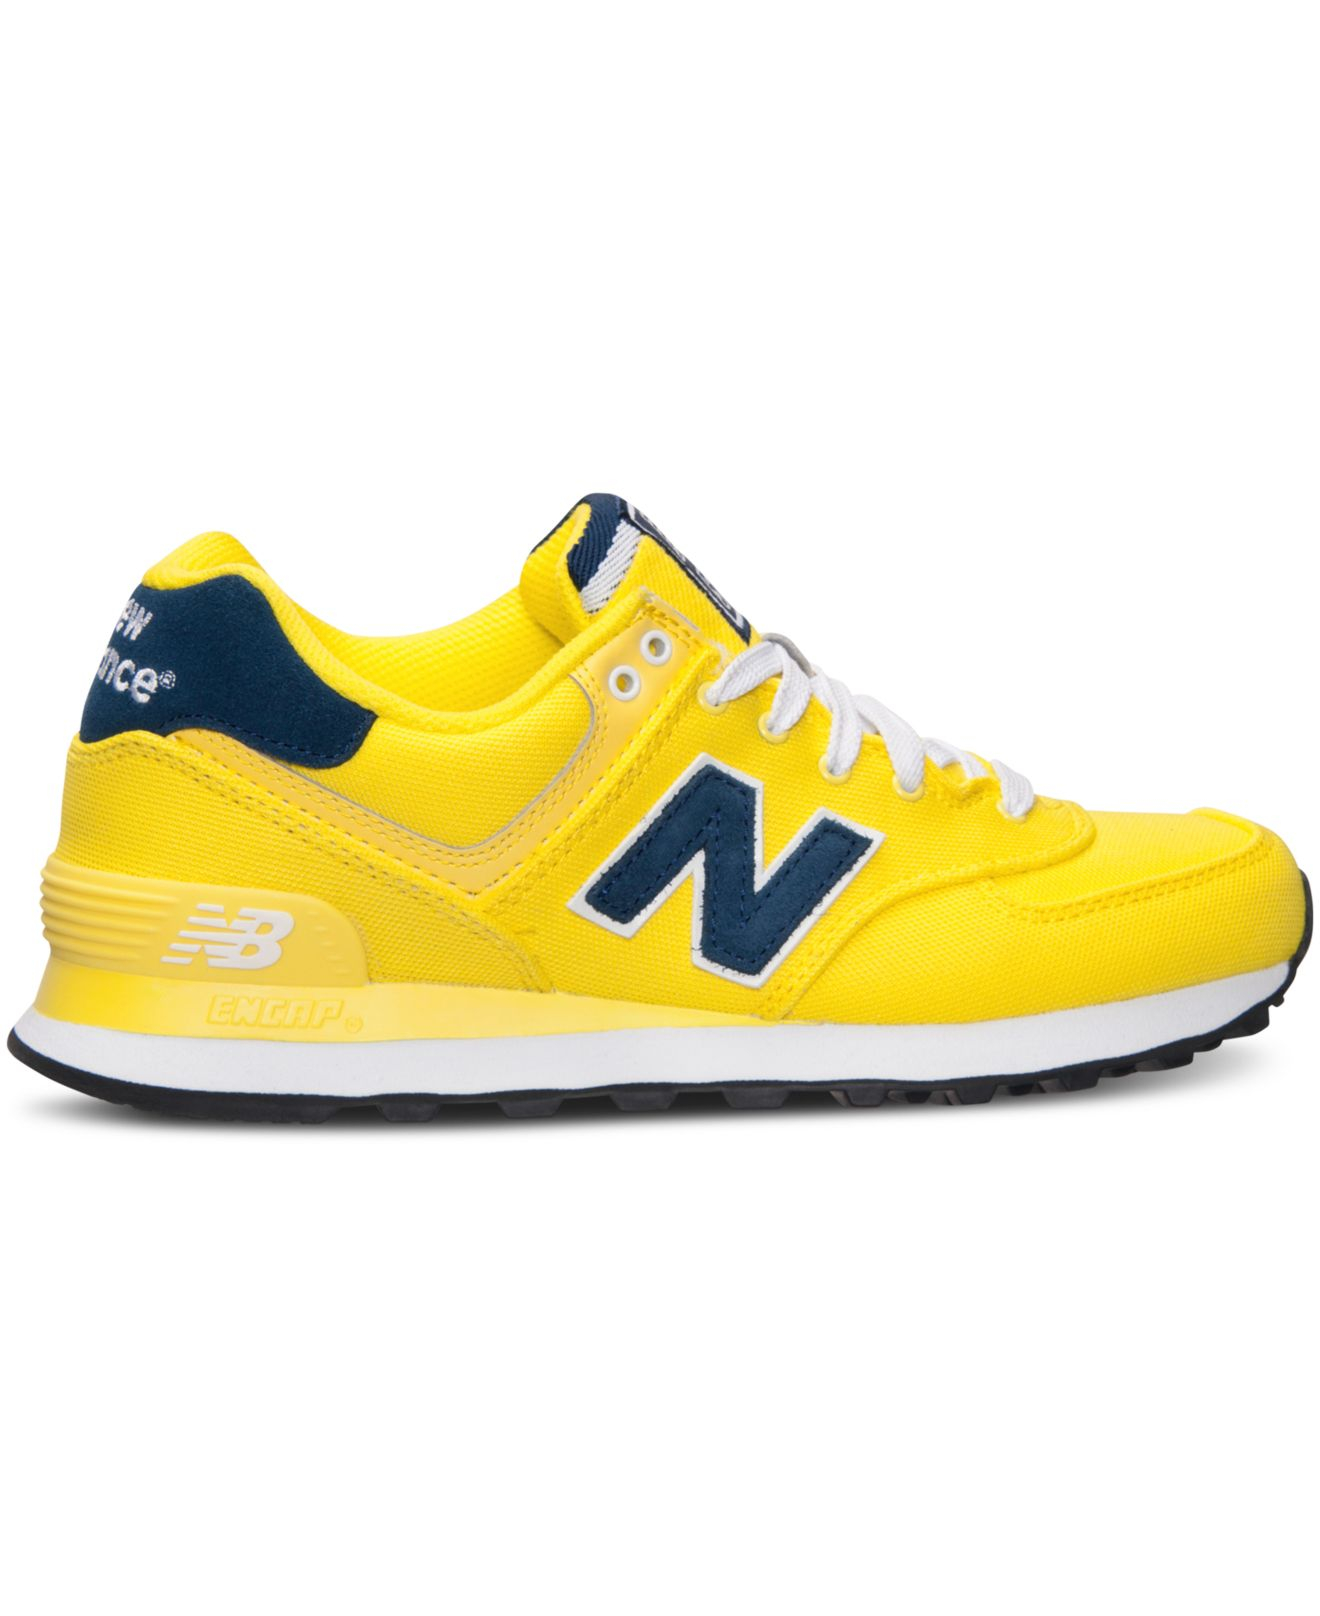 New Balance Women's 574 Casual Sneakers From Finish Line